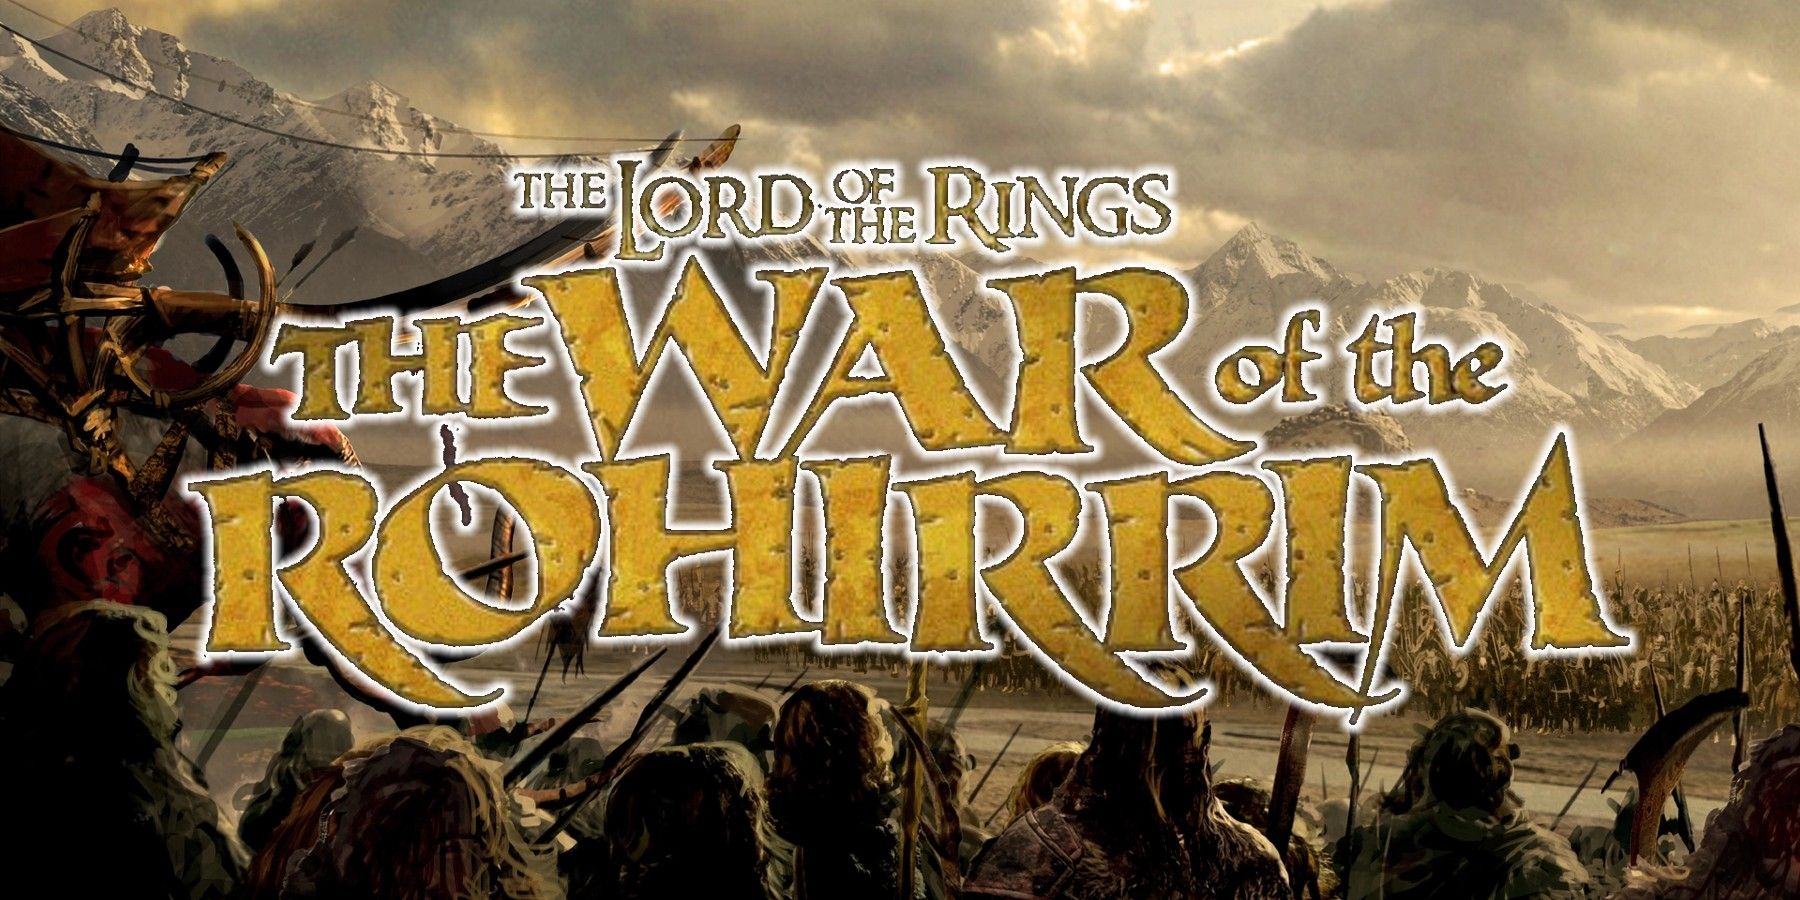 Lord of the Rings: The War of the Rohirrim anime plot details